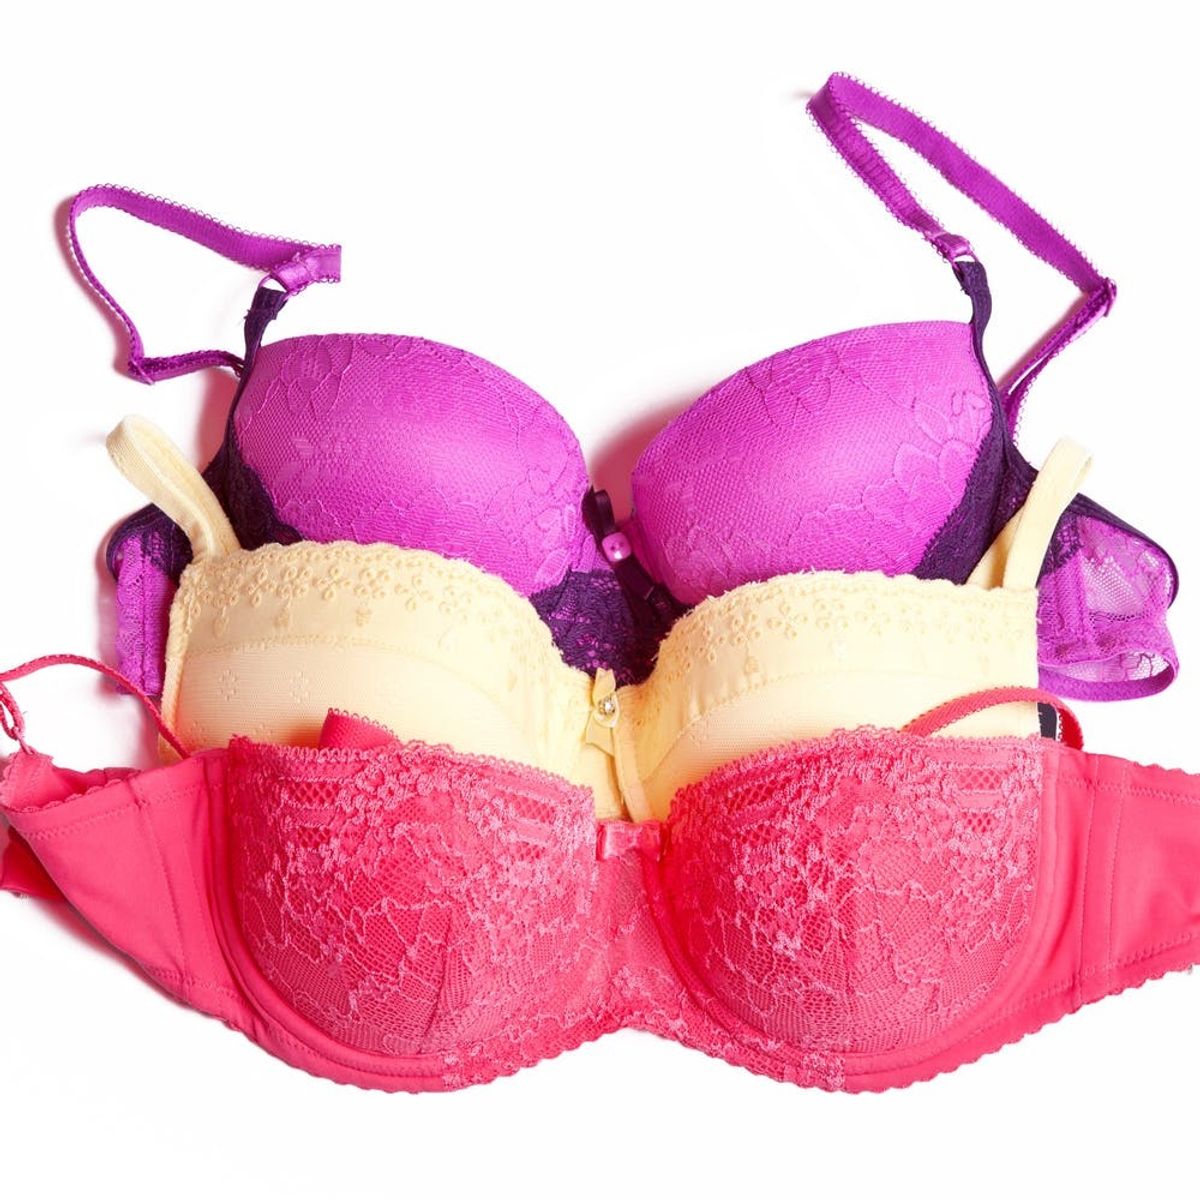 Am I Doing This Wrong? How to Buy a Perfectly Fitting Bra